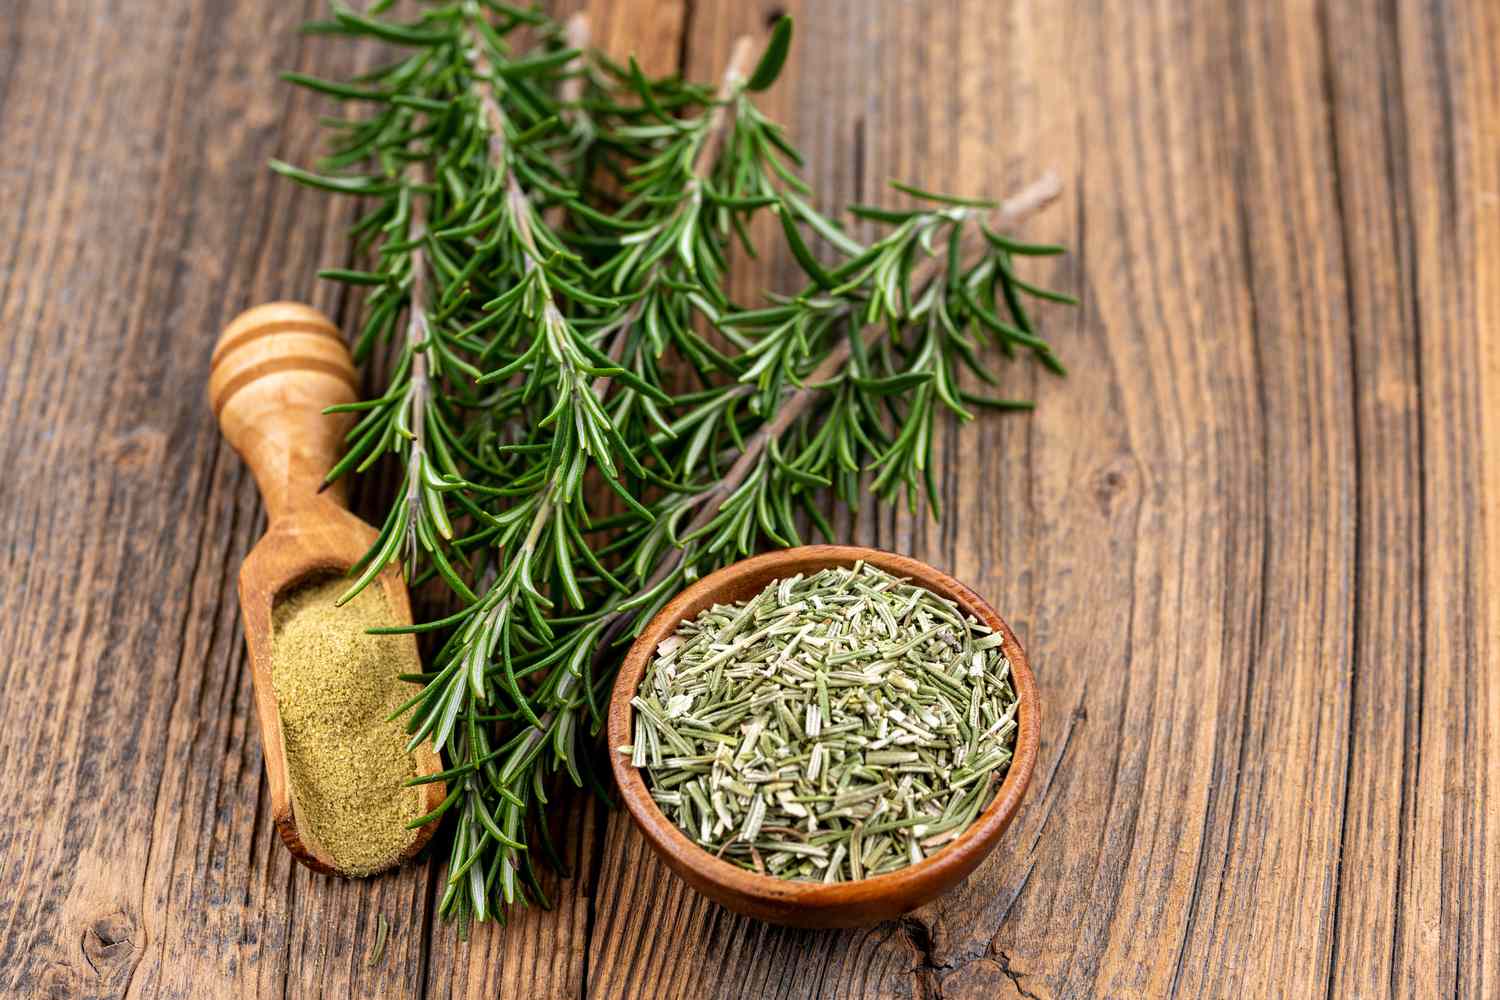 What Is The Herb Rosemary Used For